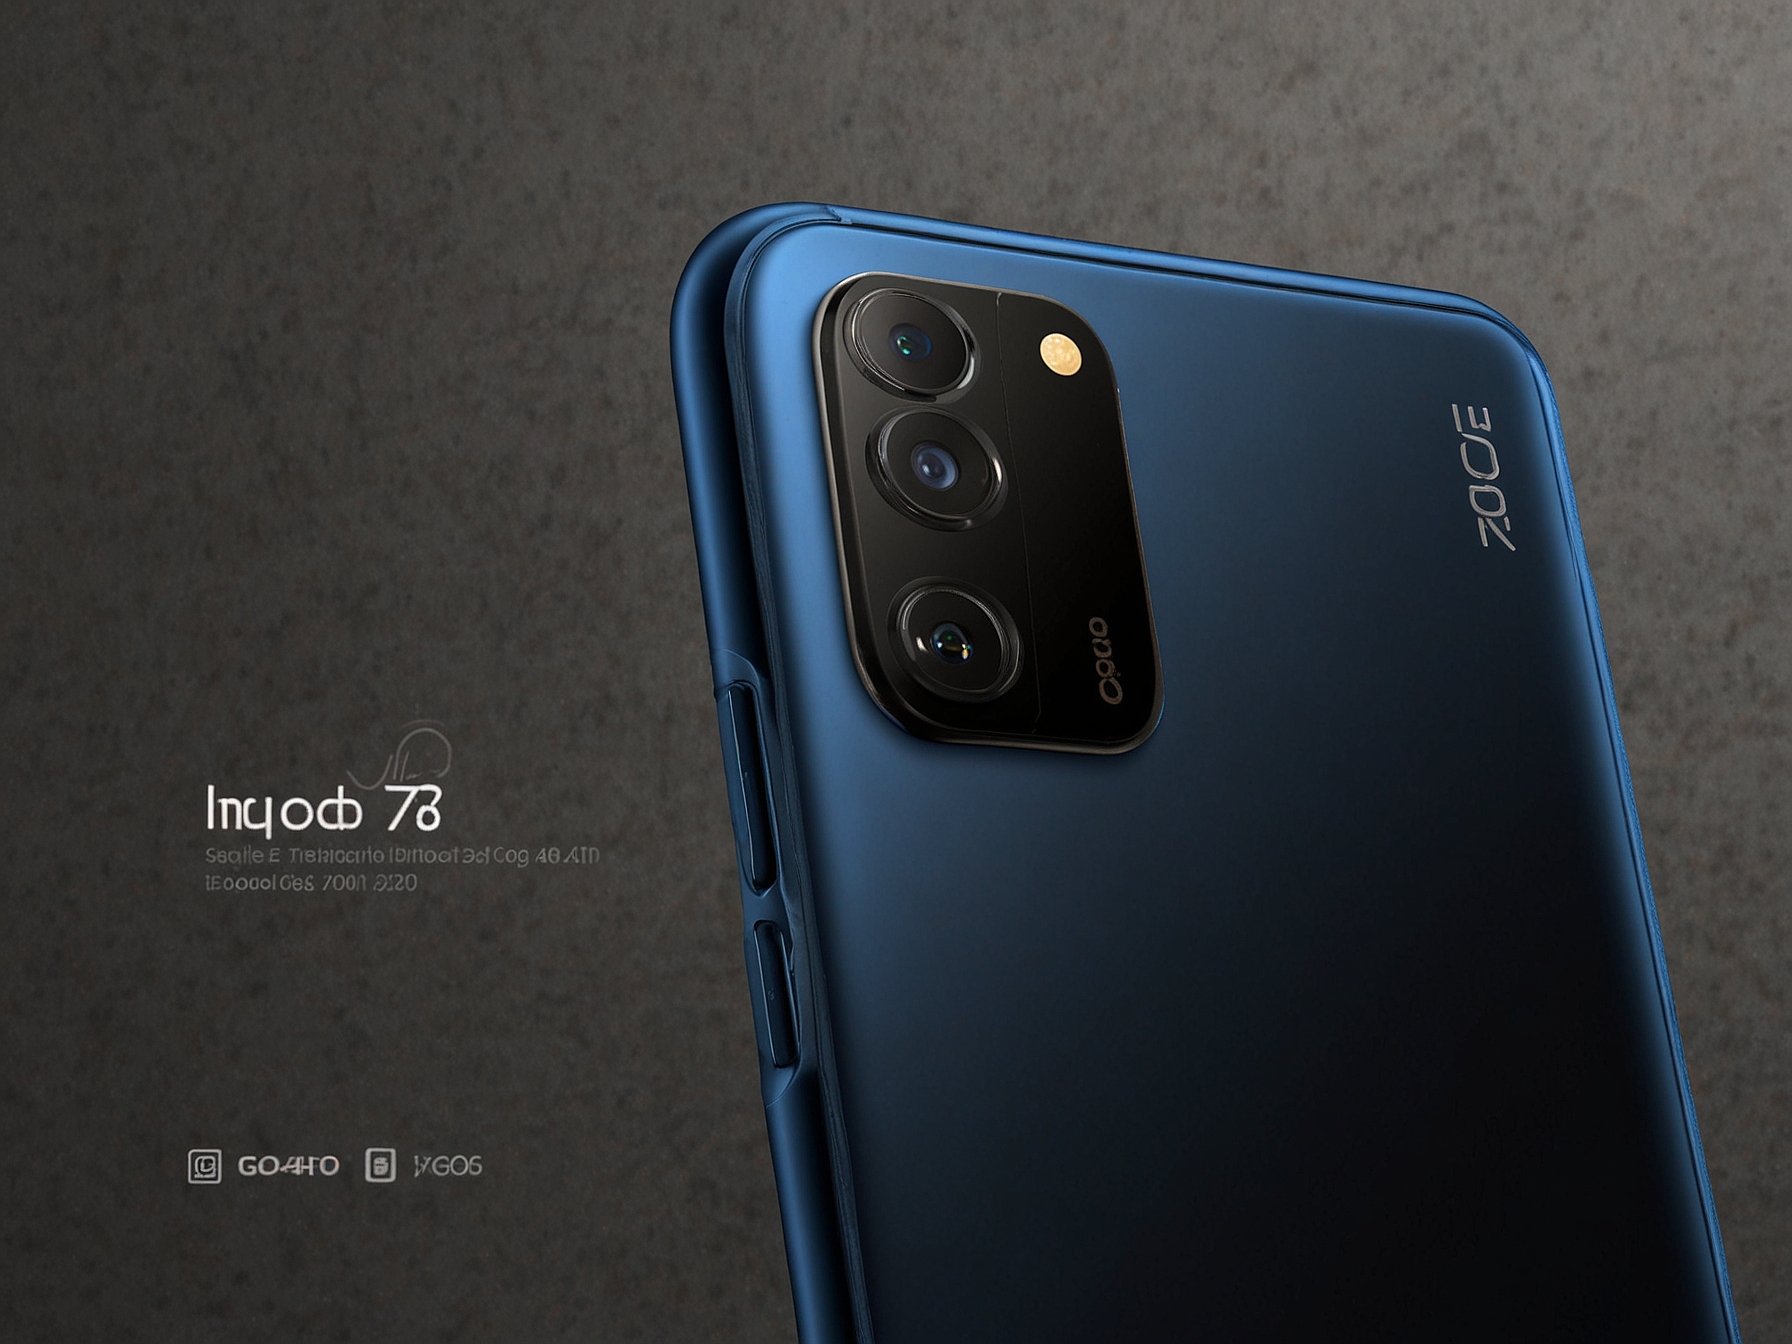 Illustration of the iQOO Z9 Lite 5G's expected triple-camera setup on the rear and high-resolution selfie camera, highlighting its versatile photography options.